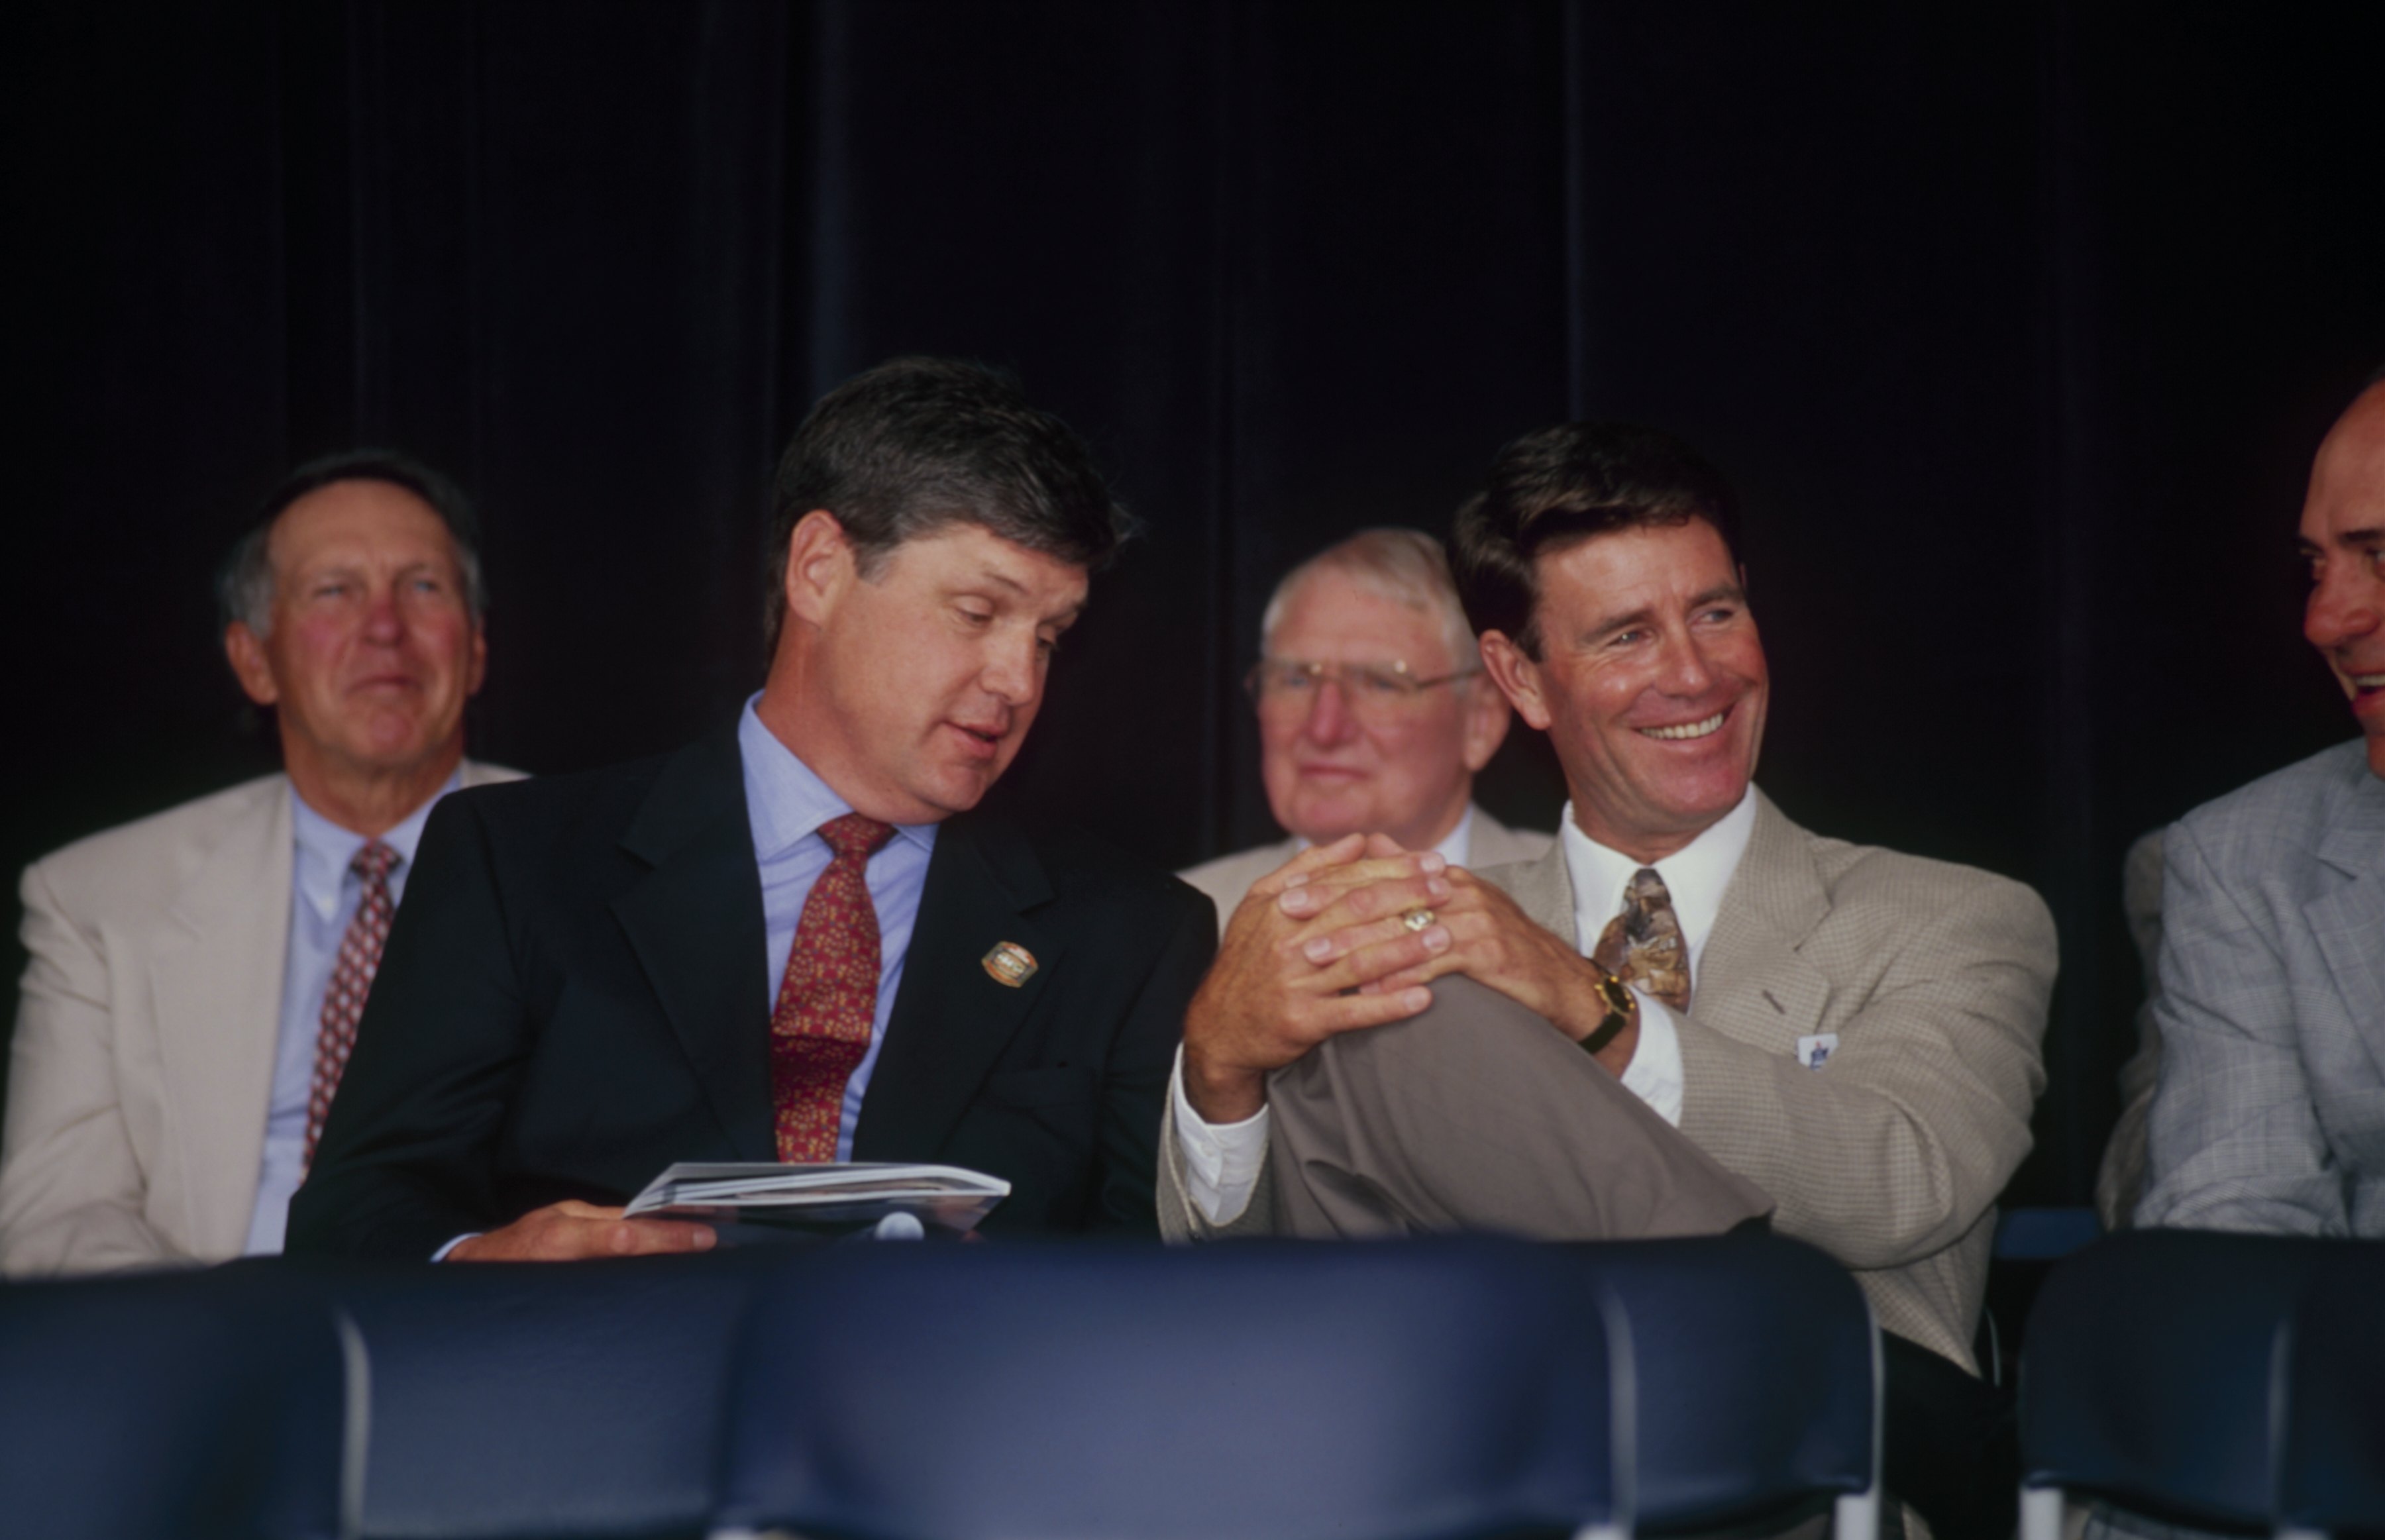 COOPERSTOWN, NY - AUGUST 3: (L) Tom Seaver and Jim Palmer attends the 1997 Hall of Fame Induction Ceremony at Clark Sports Center on August 3.1997 in Cooperstown, New York. ( Photo by: Tomasso Derosa/Getty Images)